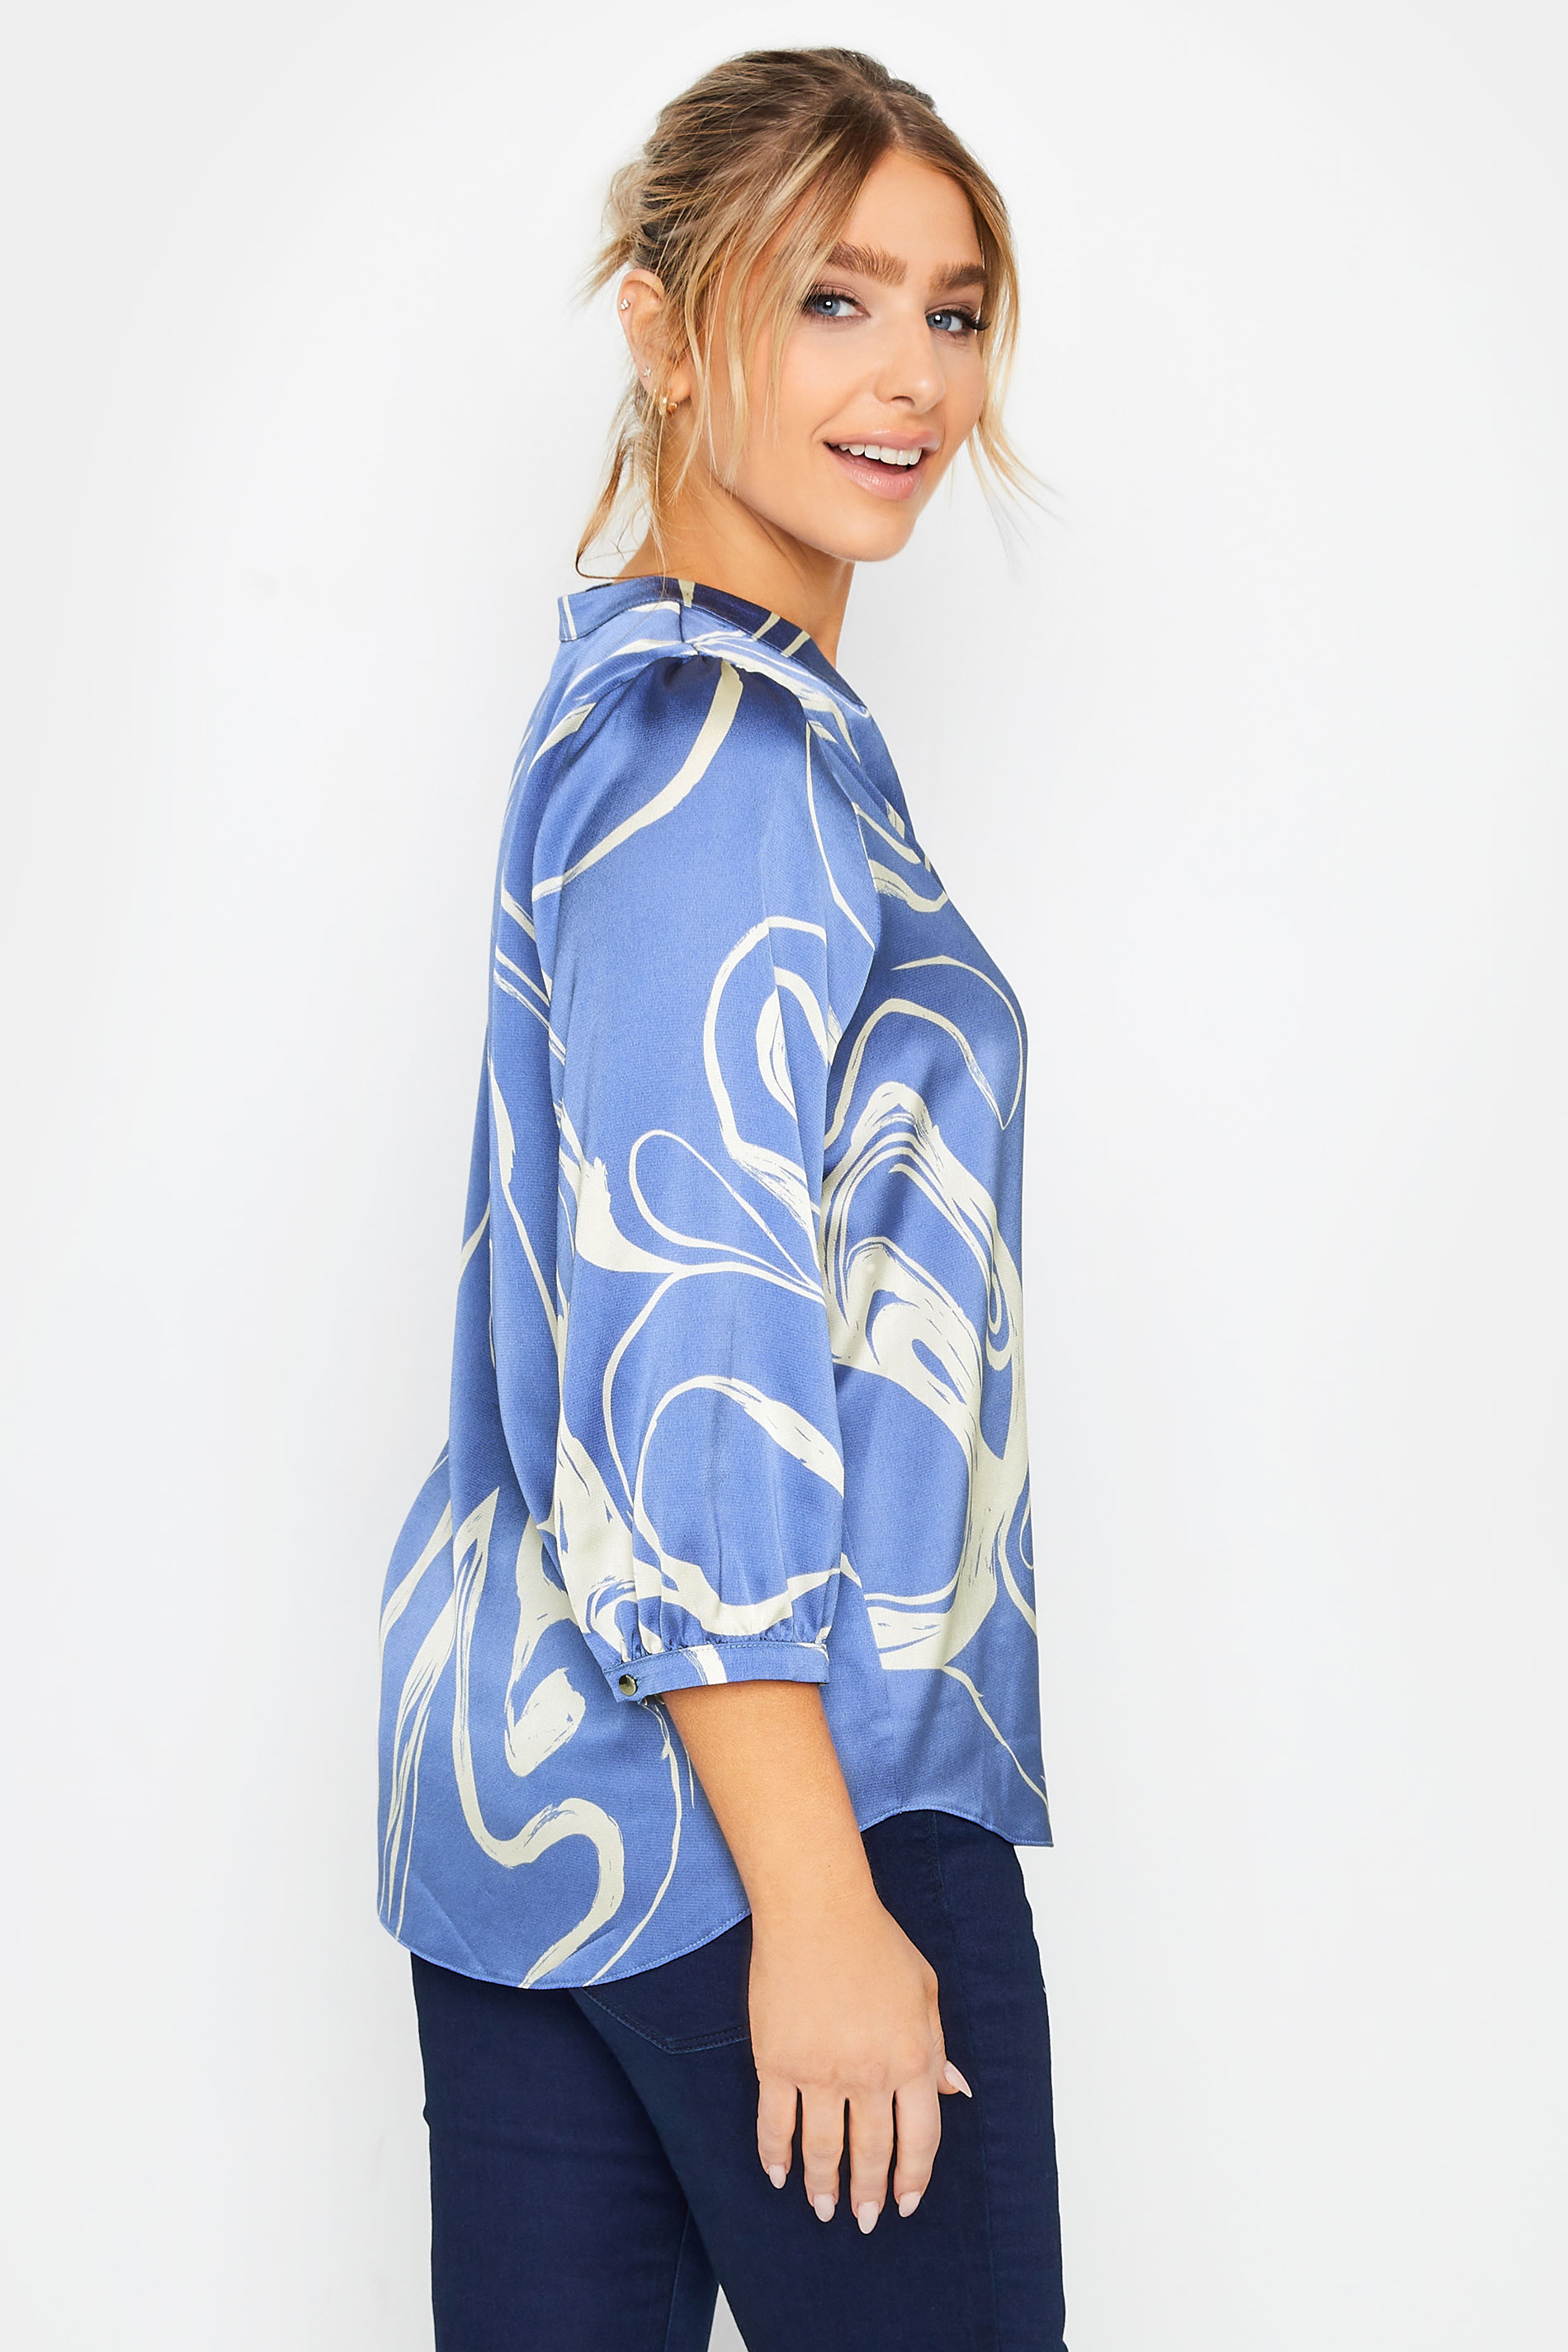 M&Co Blue Abstract Print 3/4 Sleeve Blouse | M&Co 3